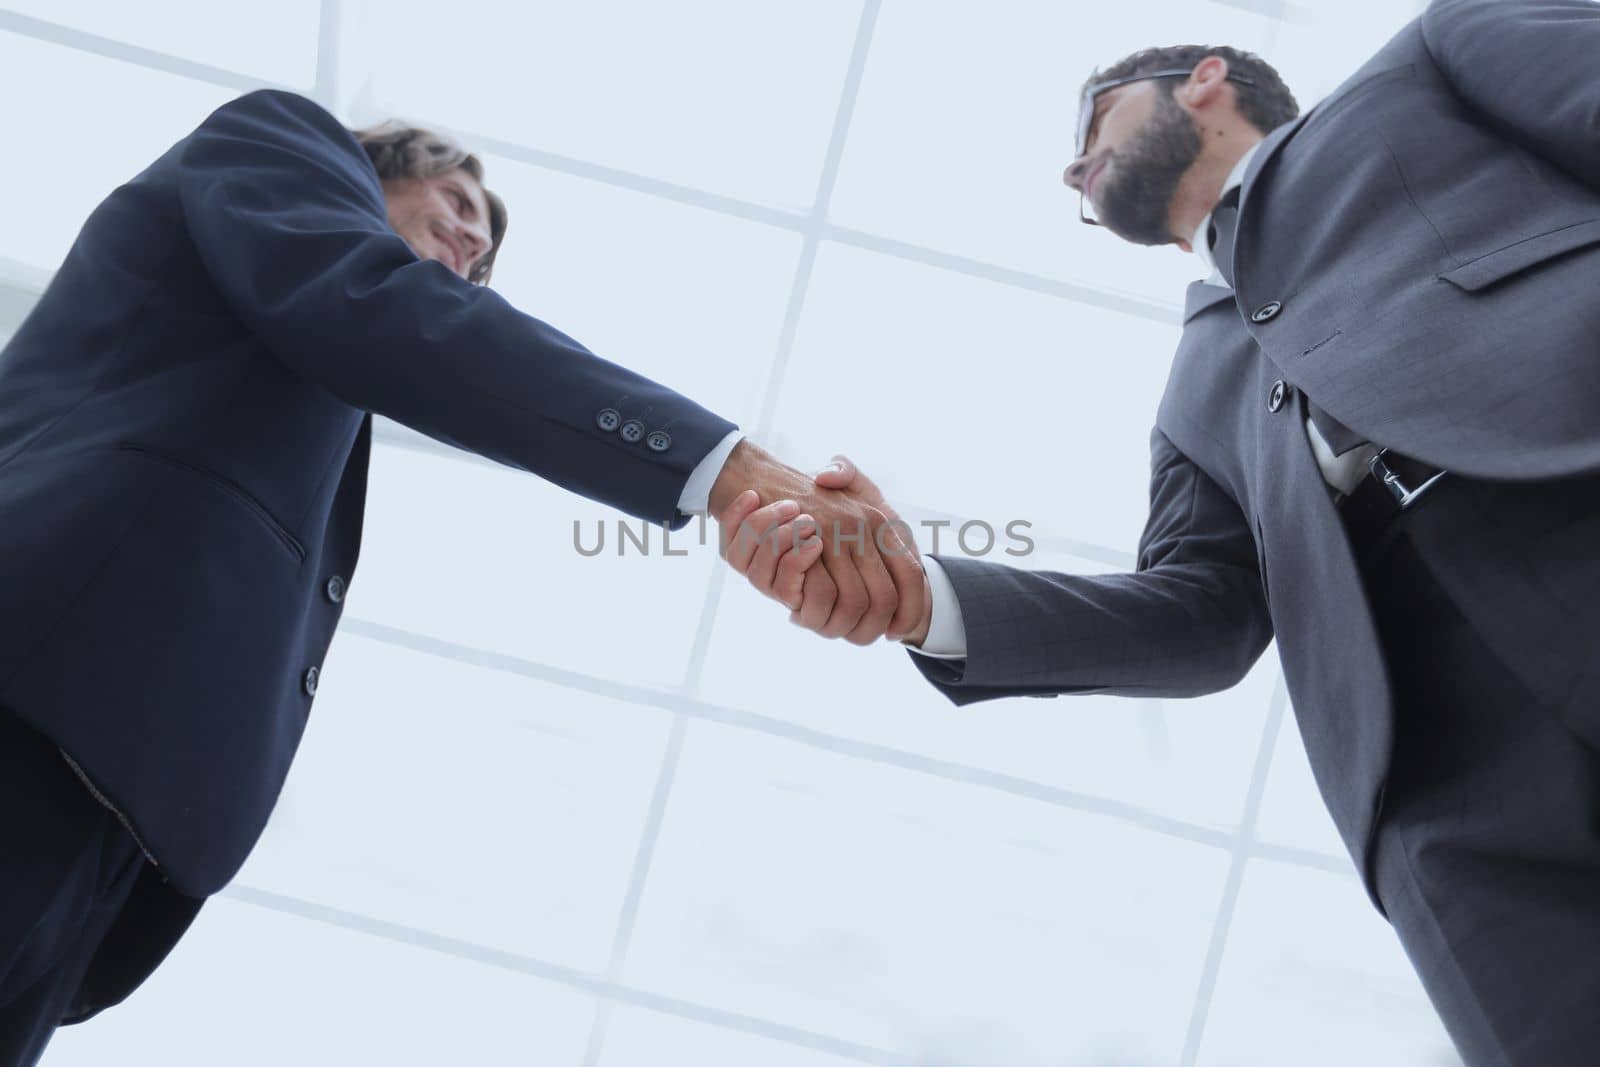 bottom view of two men shaking hands while standing by asdf